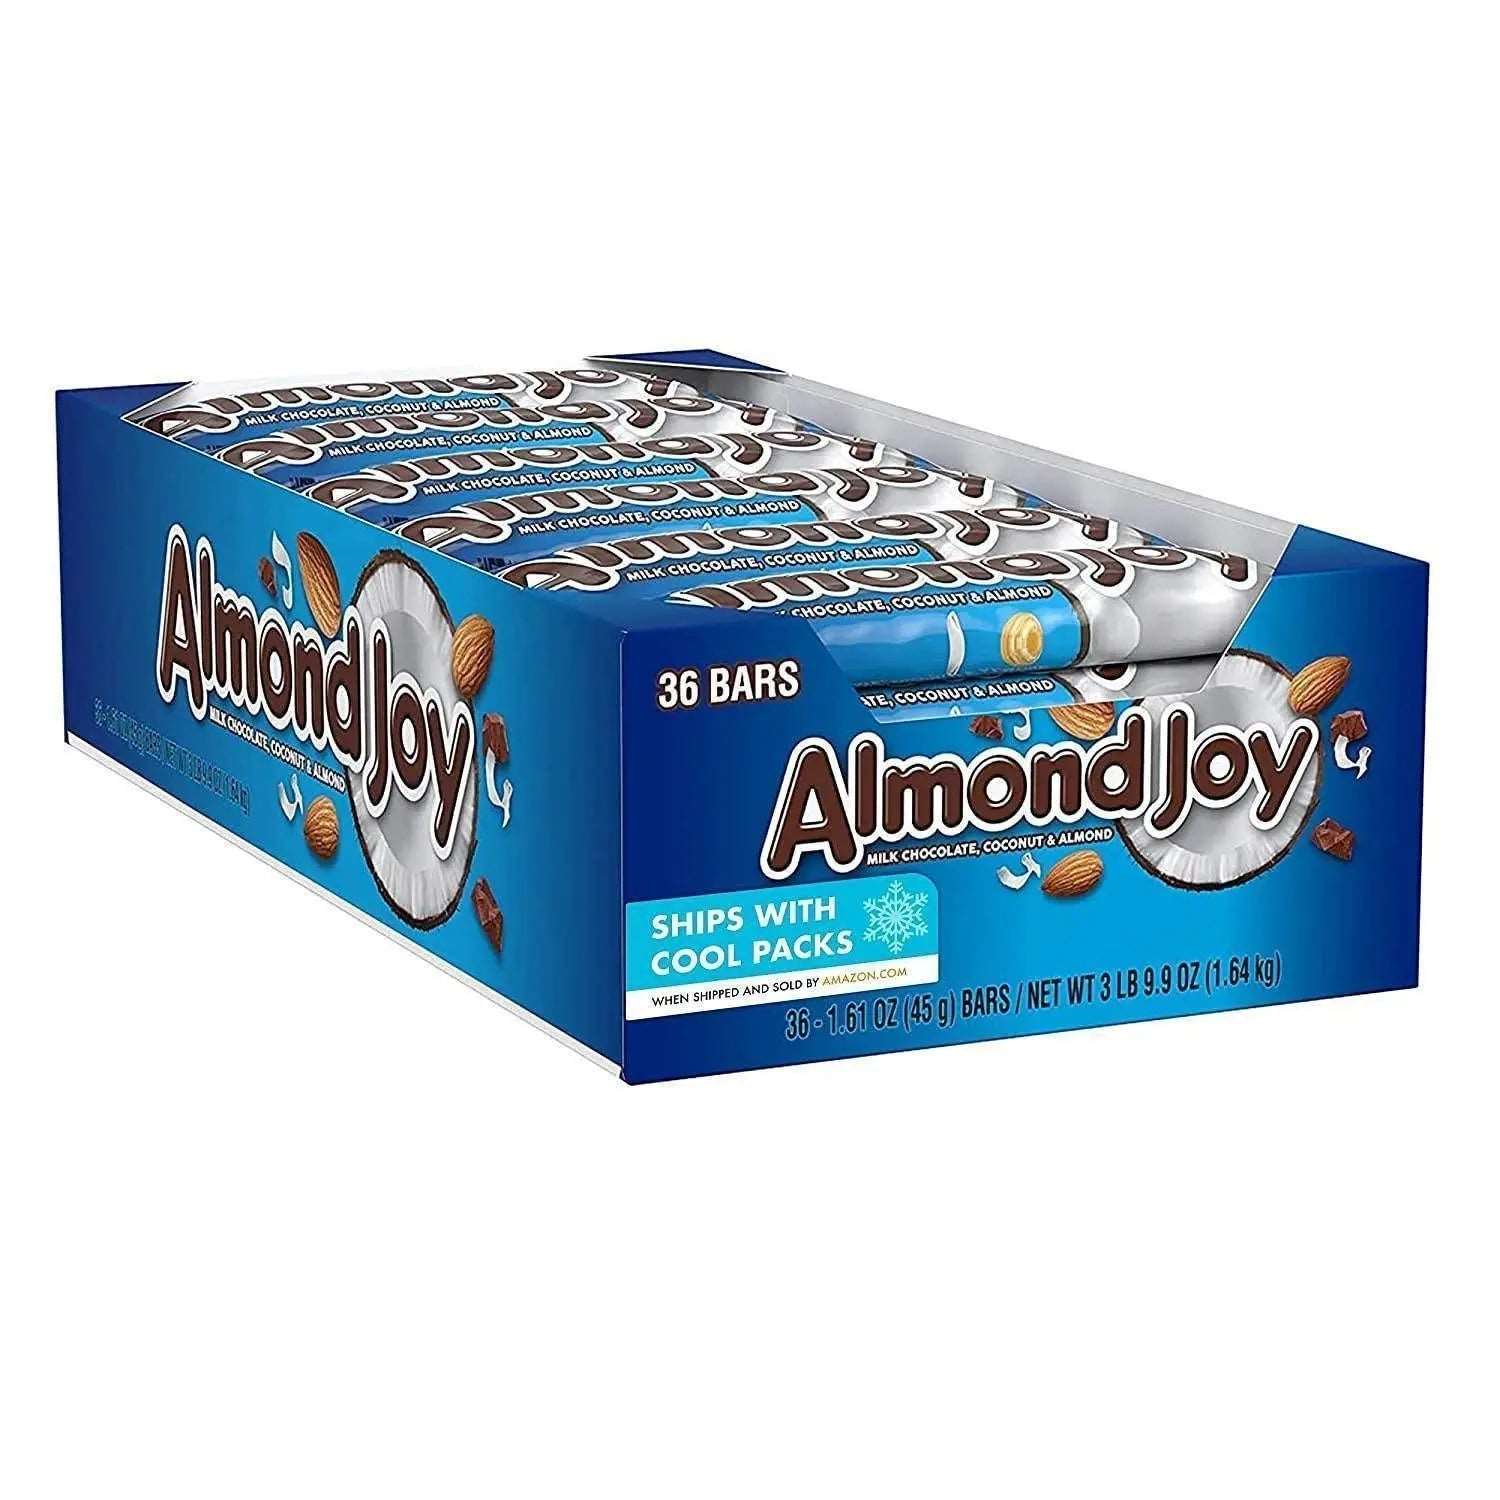 Wholesale prices with free shipping all over United States Coconut and Almond Chocolate Candy Bars - Steven Deals